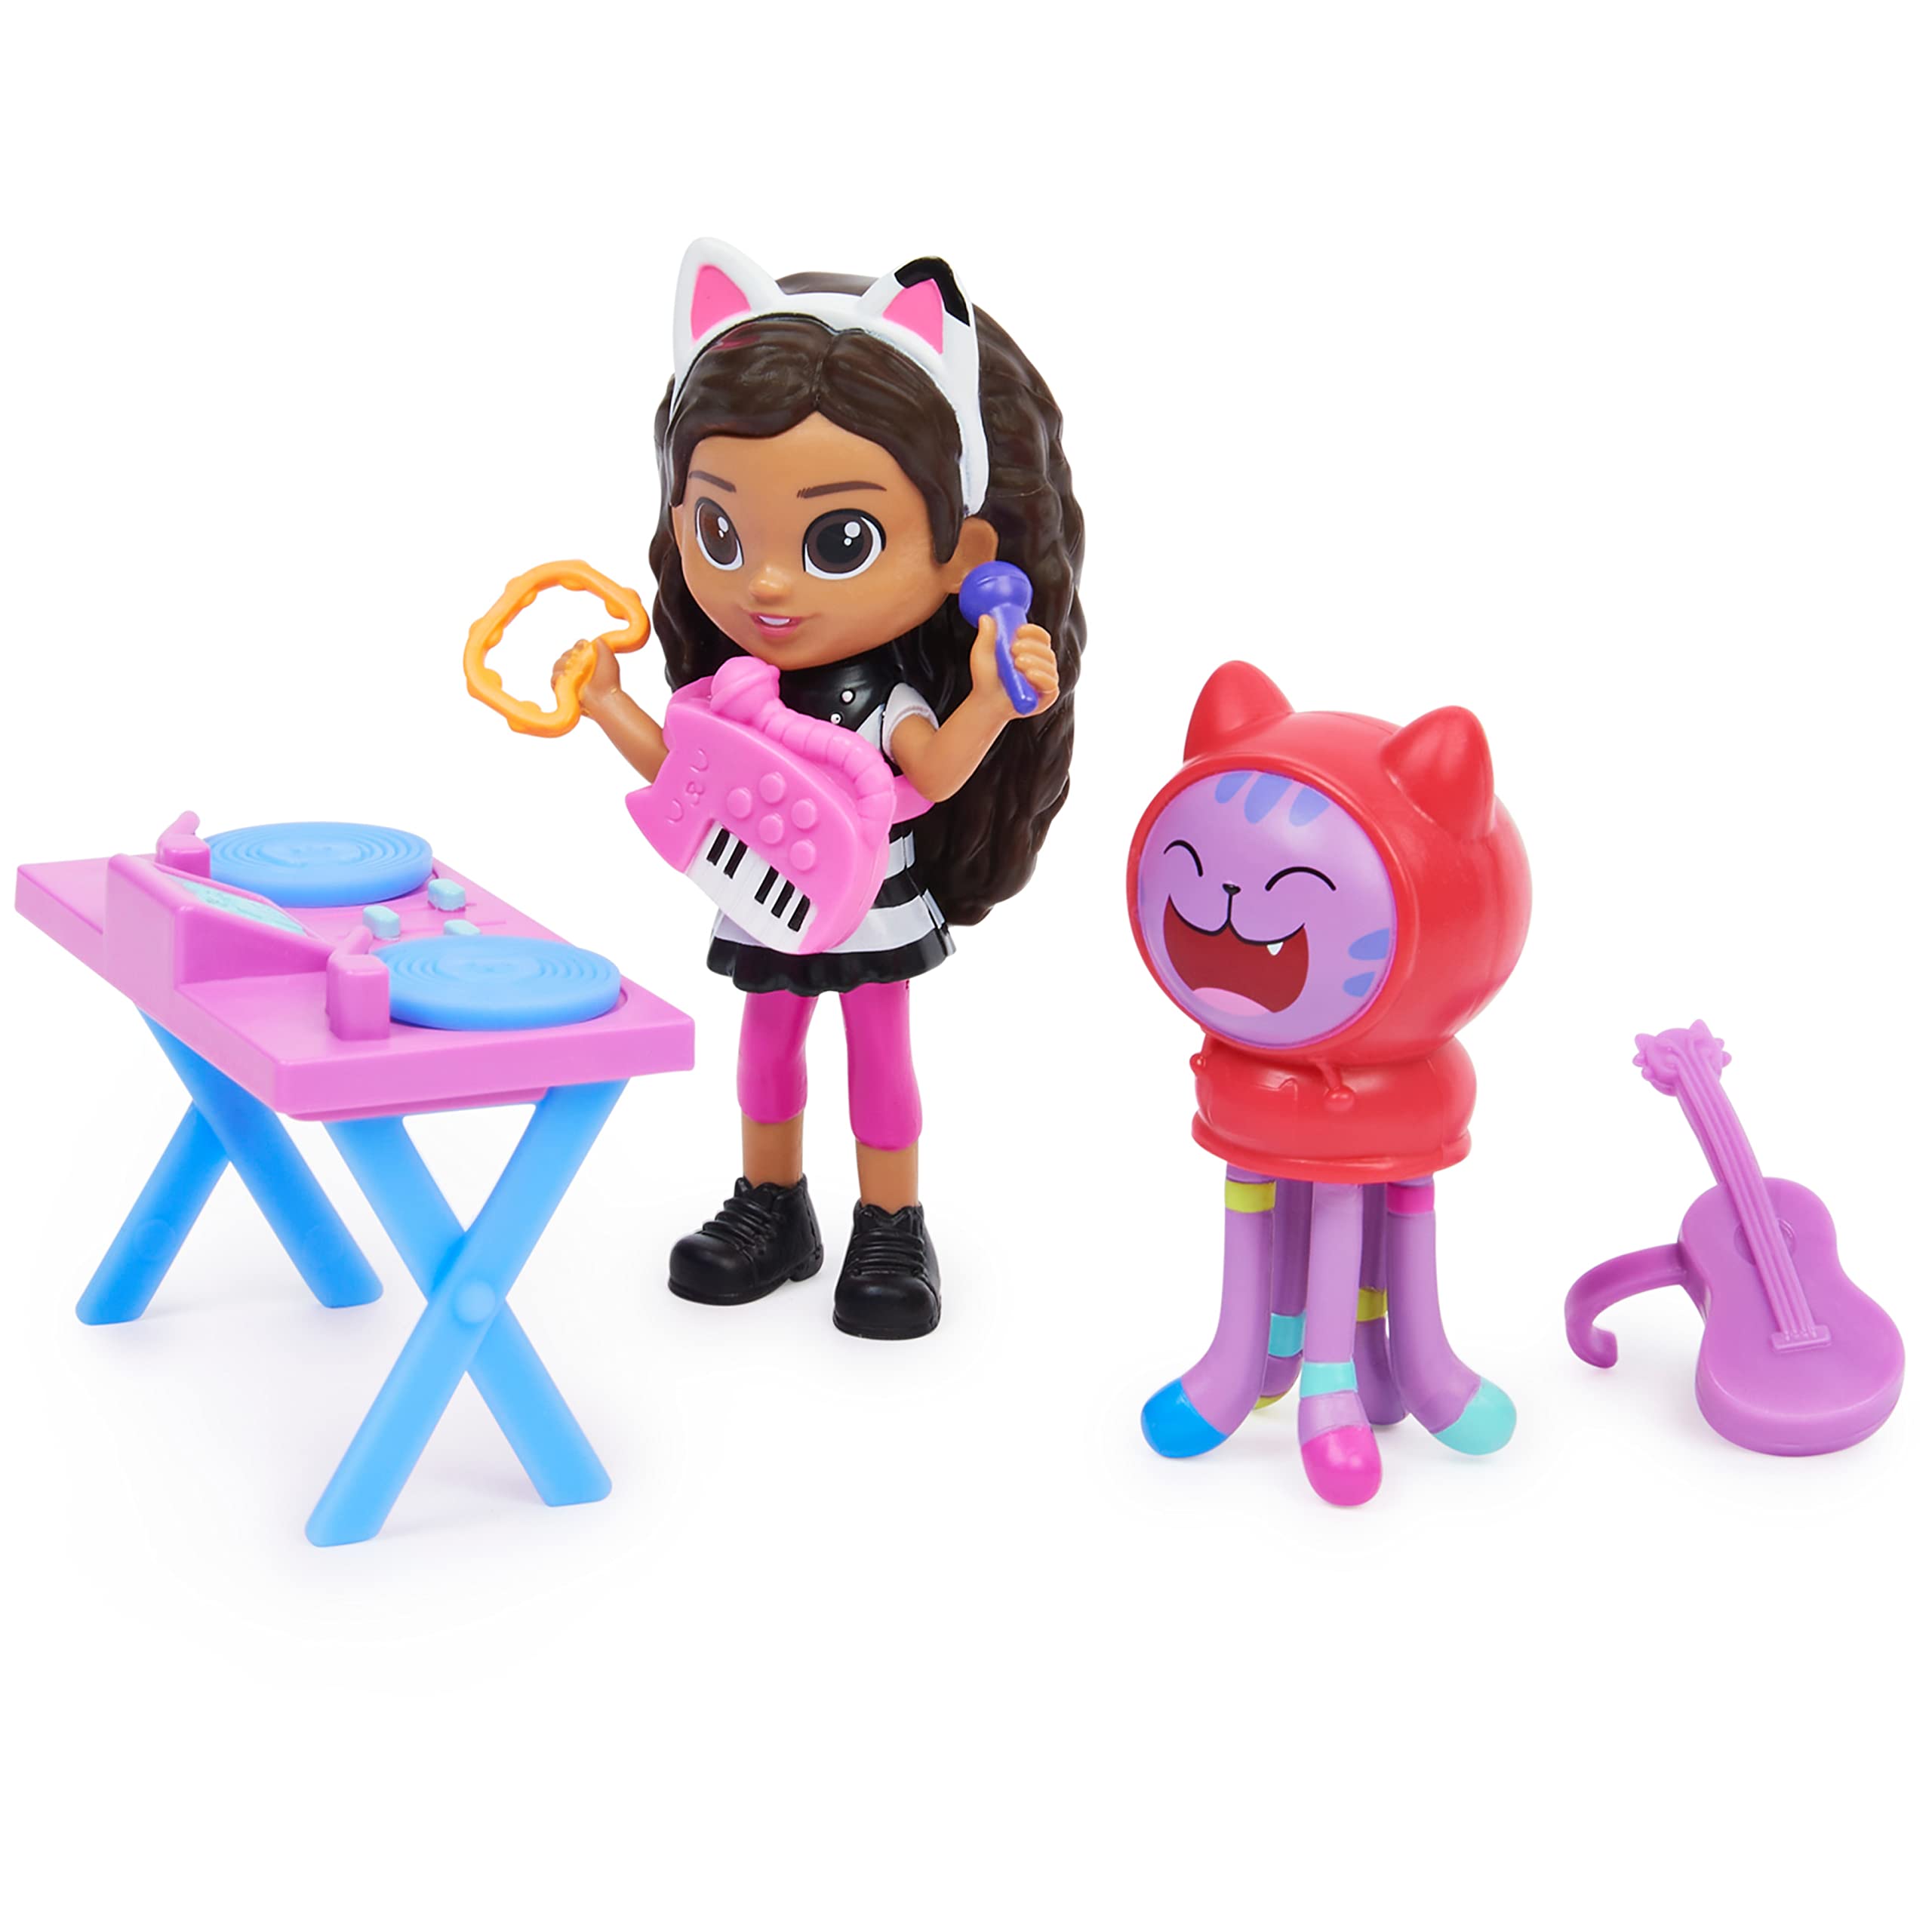 Gabby’s Dollhouse, Kitty Karaoke Set with 2 Toy Figures, 2 Accessories, Delivery and Furniture Piece, Kids Toys for Ages 3 and up